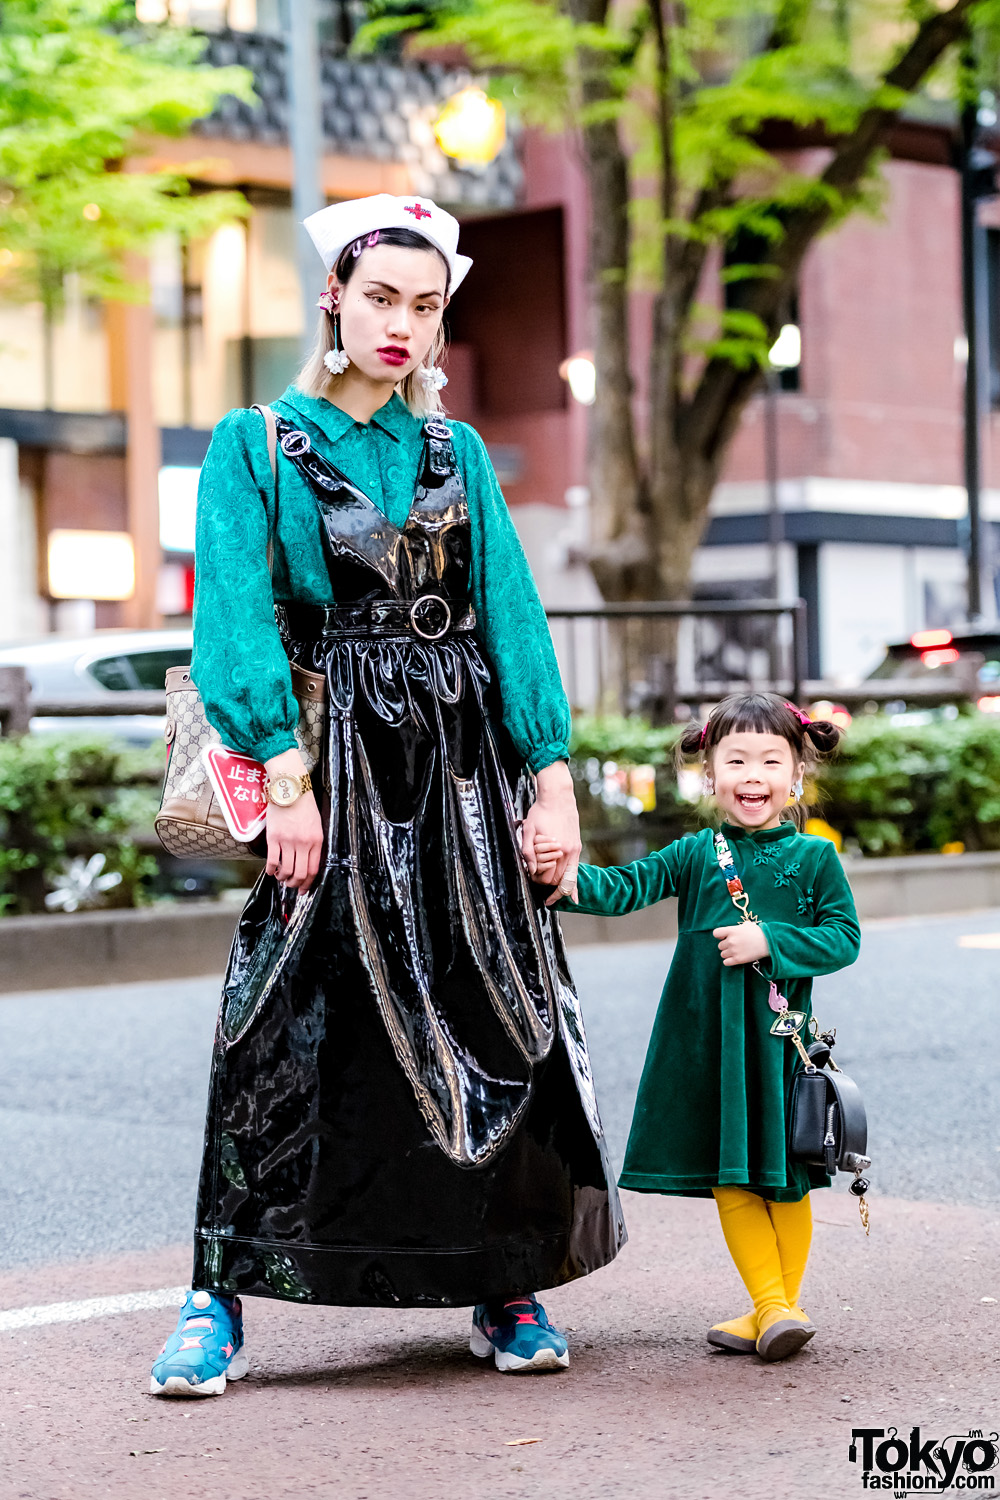 The Ivy Tokyo Jewelry Designer Mothers & Daughter Street Styles w/ Growing Pains, Vivienne Westwood & Gucci